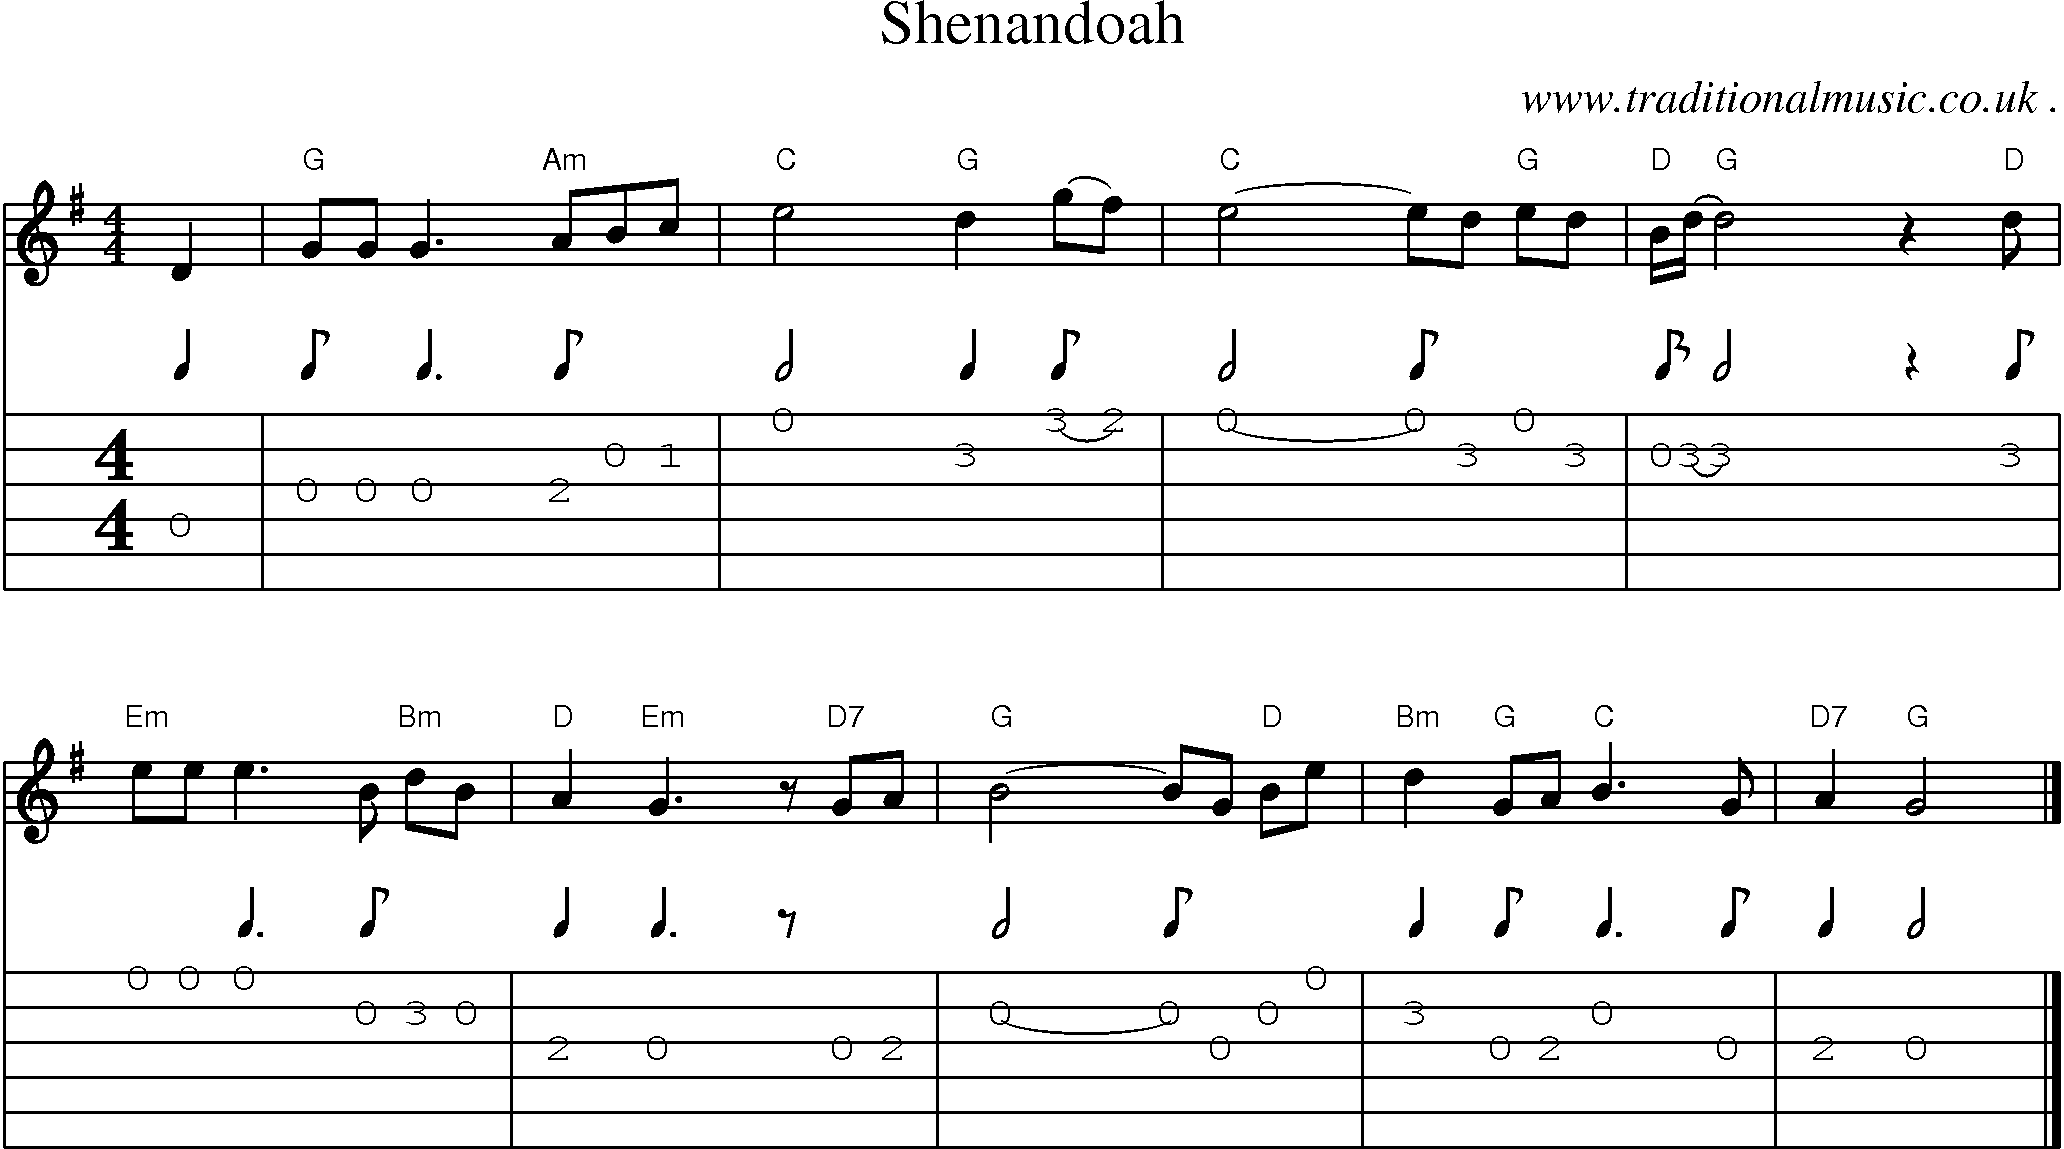 Music Score and Guitar Tabs for Shenandoah